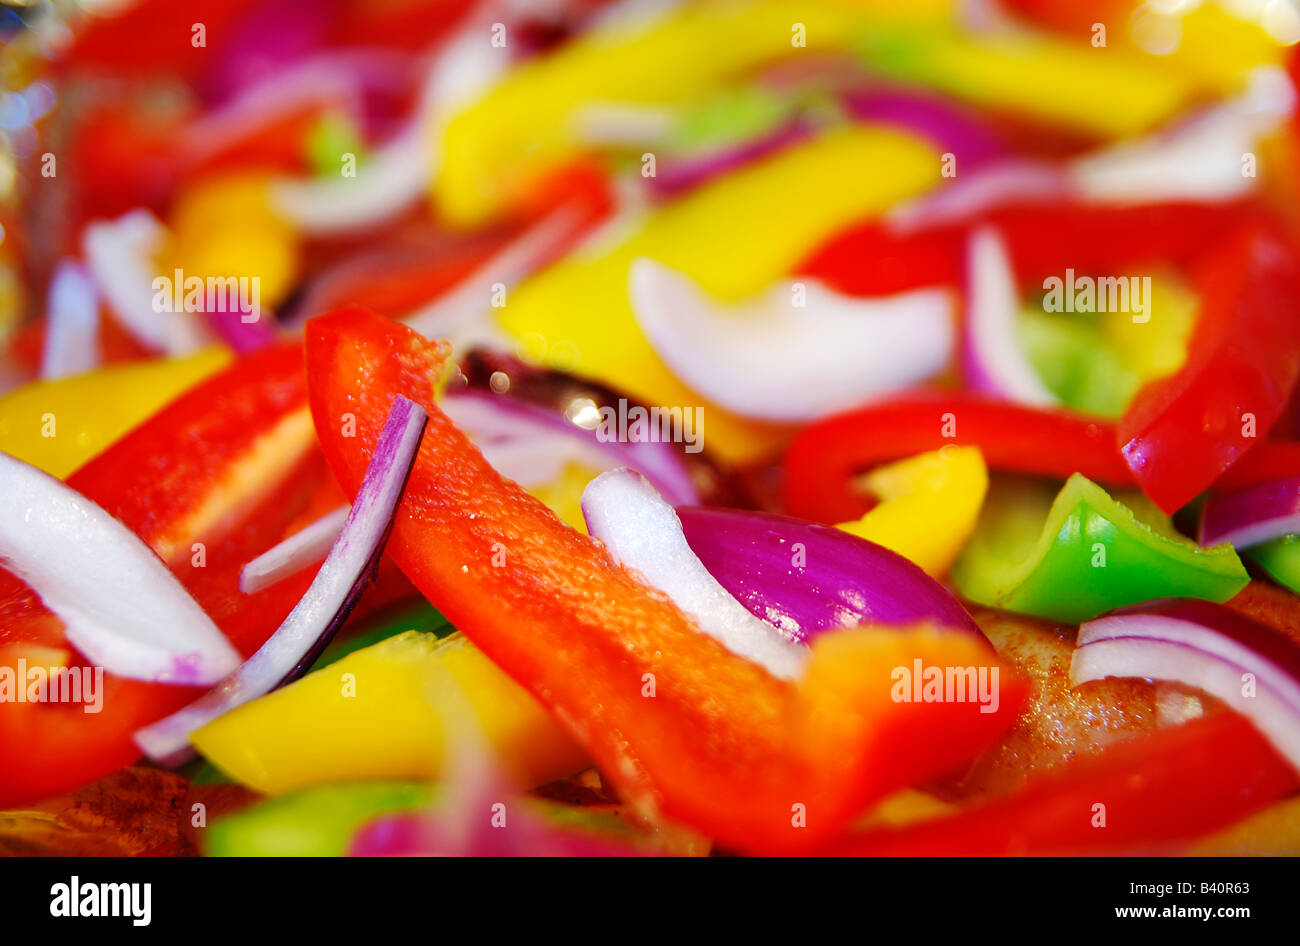 Red, Green, Yellow Peppers chopped up with Red Onions Stock Photo